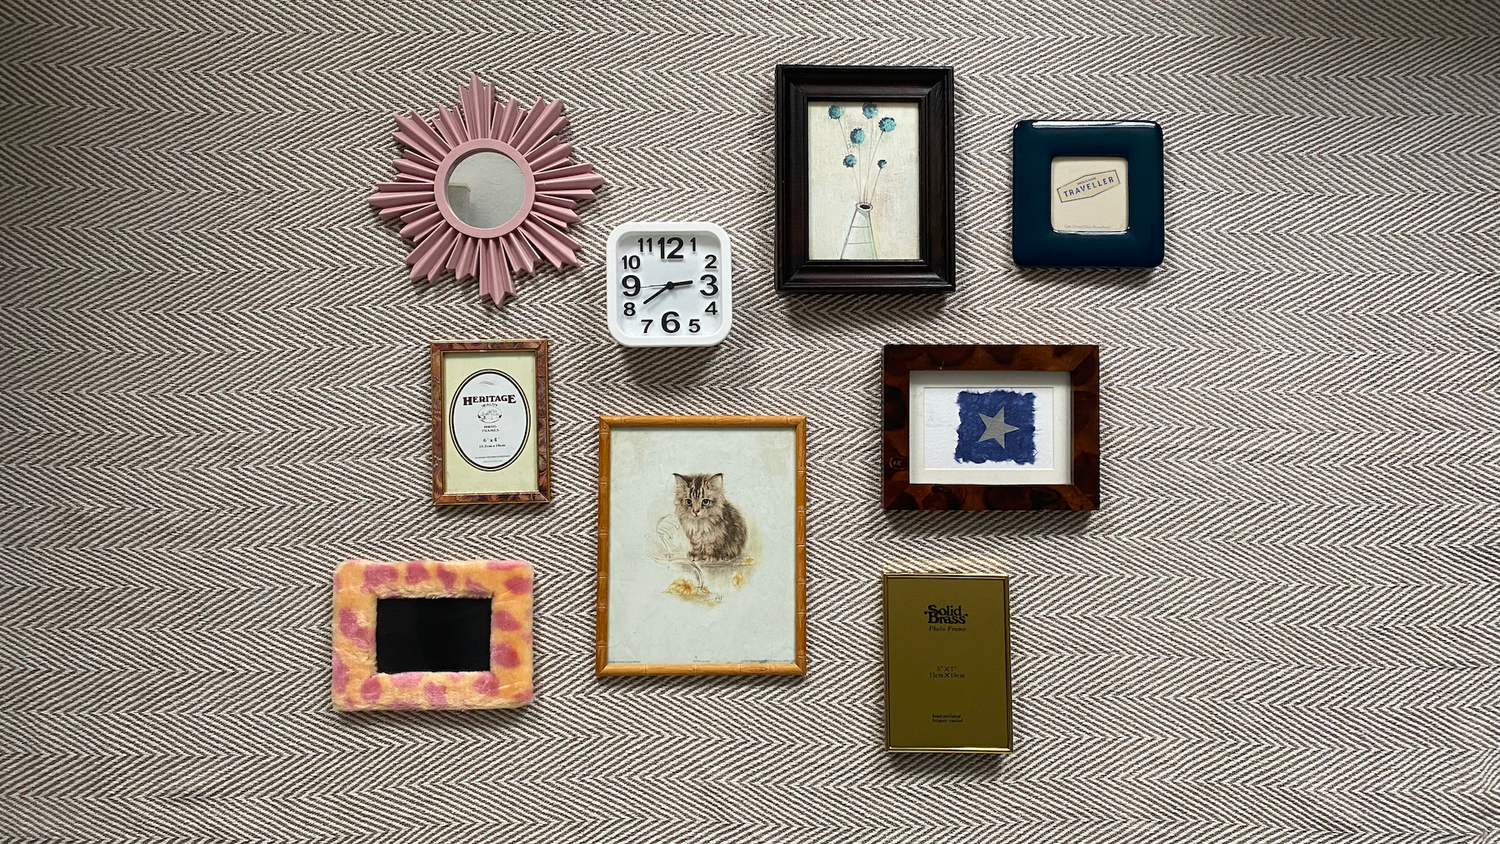 Small picture frames and a clock laid flat on the floor